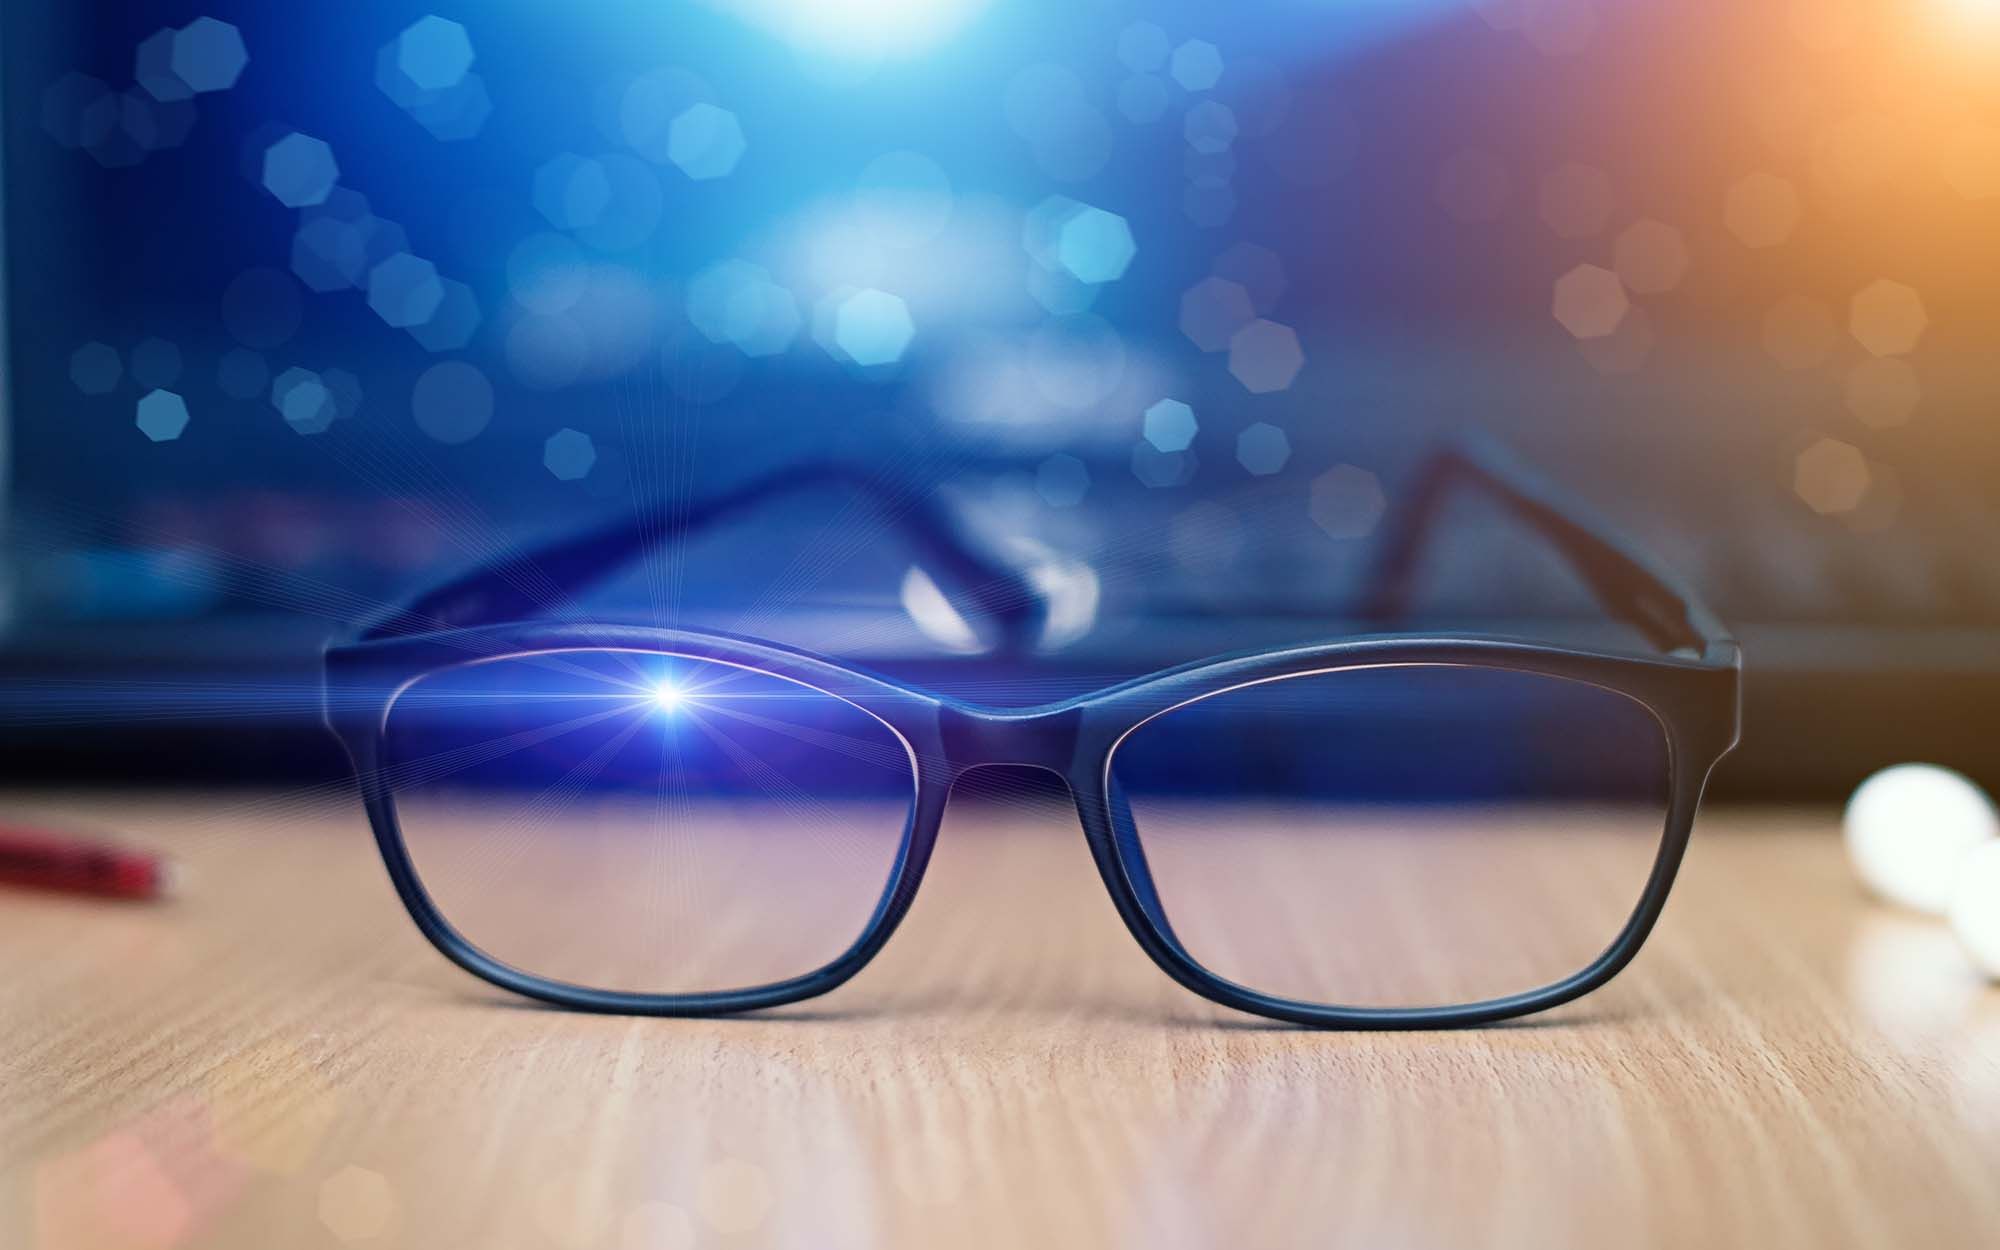 Blue Light and Eye Health: The Risks, Benefits, and How to Avoid Over-Exposure